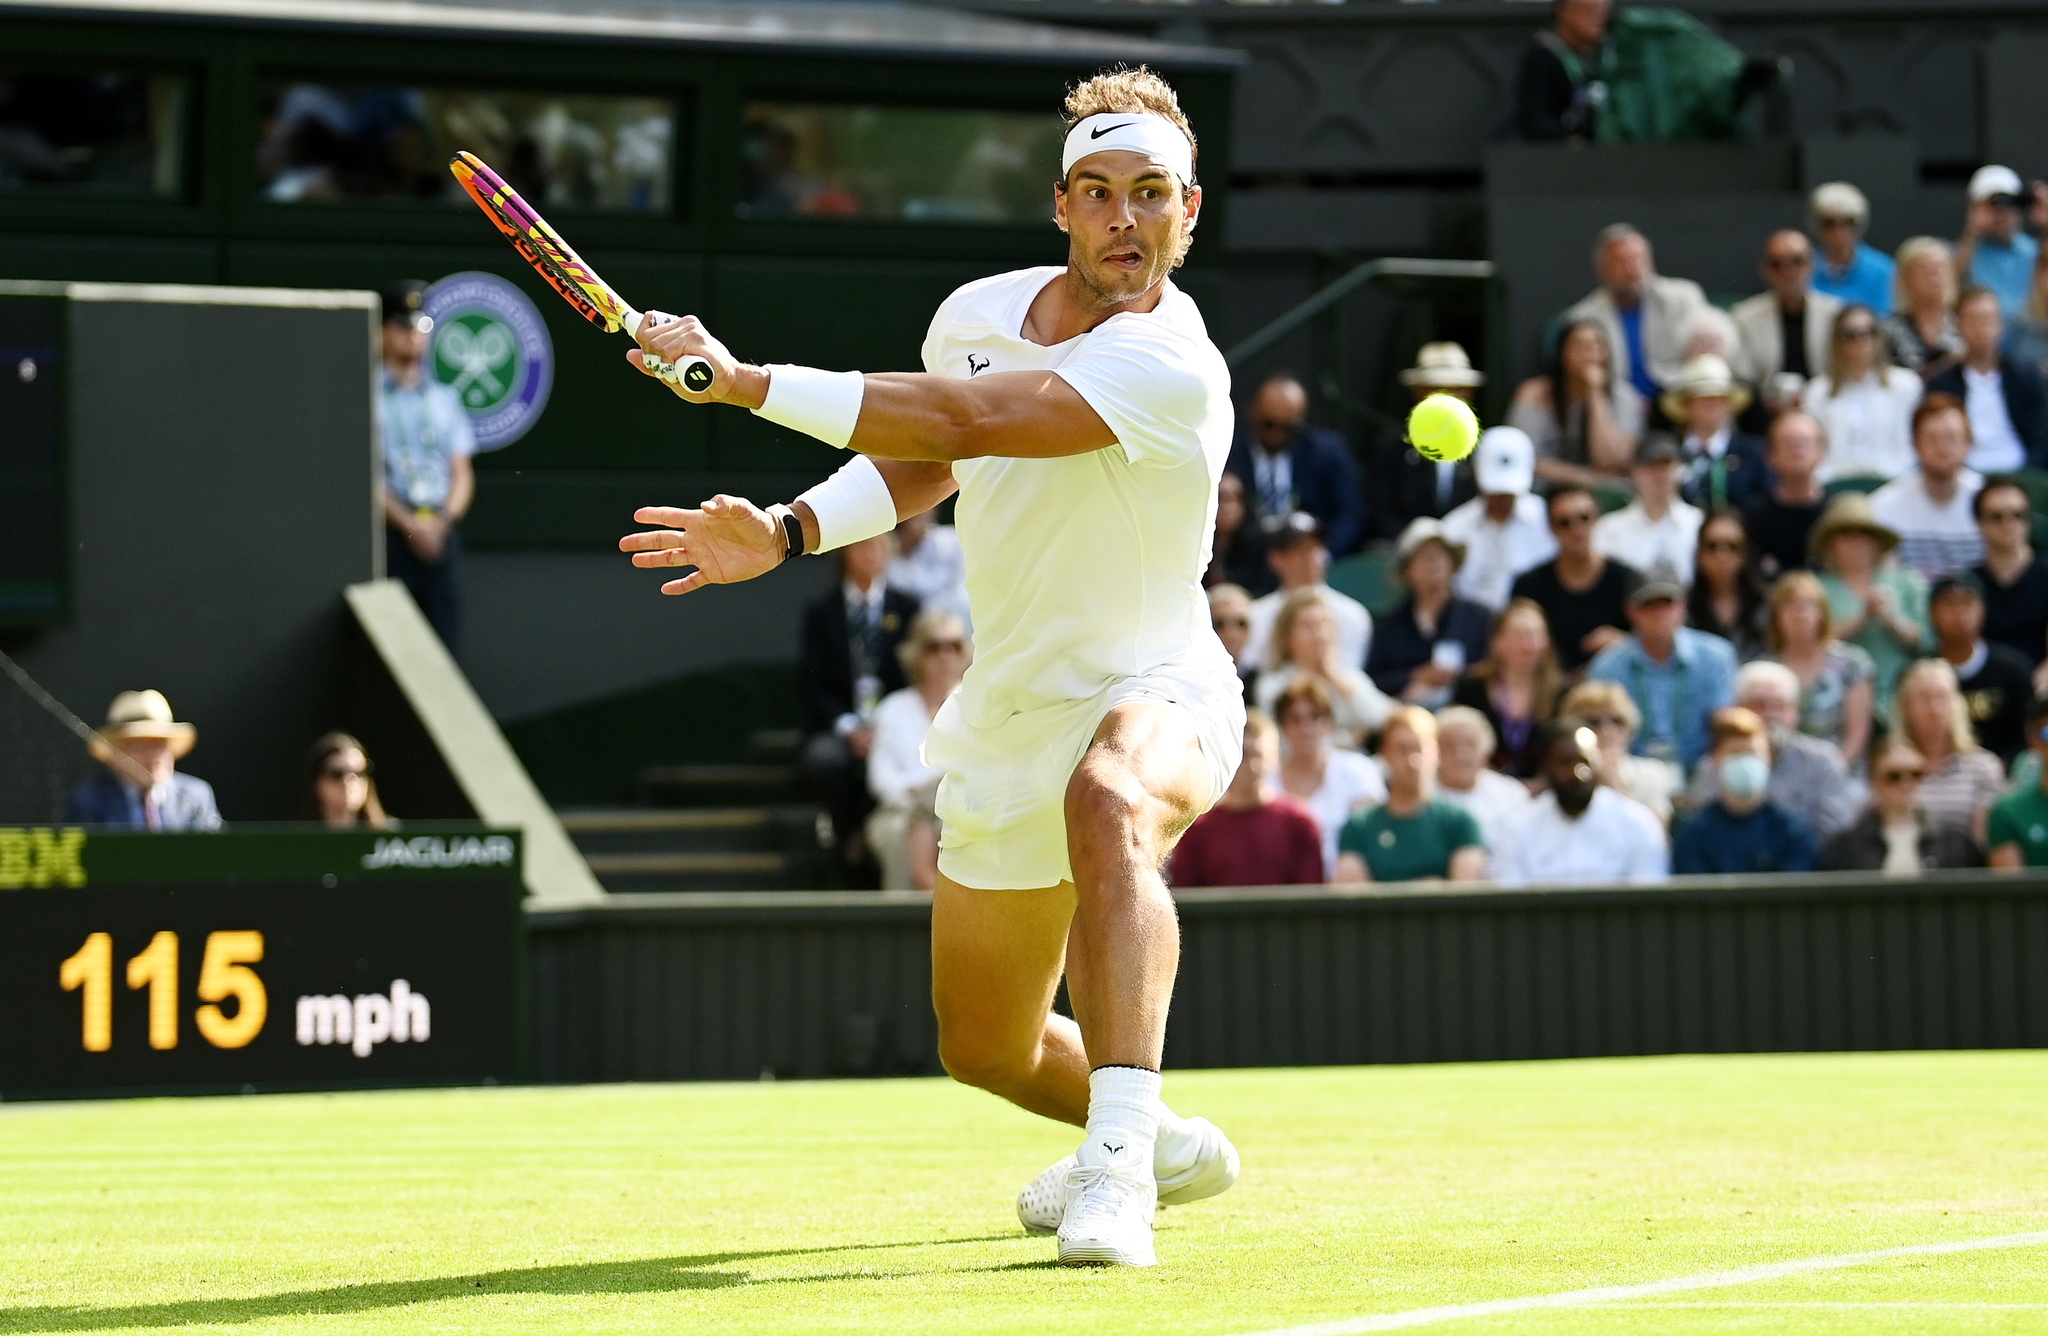 Wimbledon (United Kingdom), 30/06/2022.- Rafael  lt;HIT gt;Nadal lt;/HIT gt; of Spain in action in the men's second round match against Ricardas Berankis of Lithuania at the Wimbledon Championships, in Wimbledon, Britain, 30 June 2022. (Tenis, Lituania, España, Reino Unido) EFE/EPA/NEIL HALL EDITORIAL USE ONLY